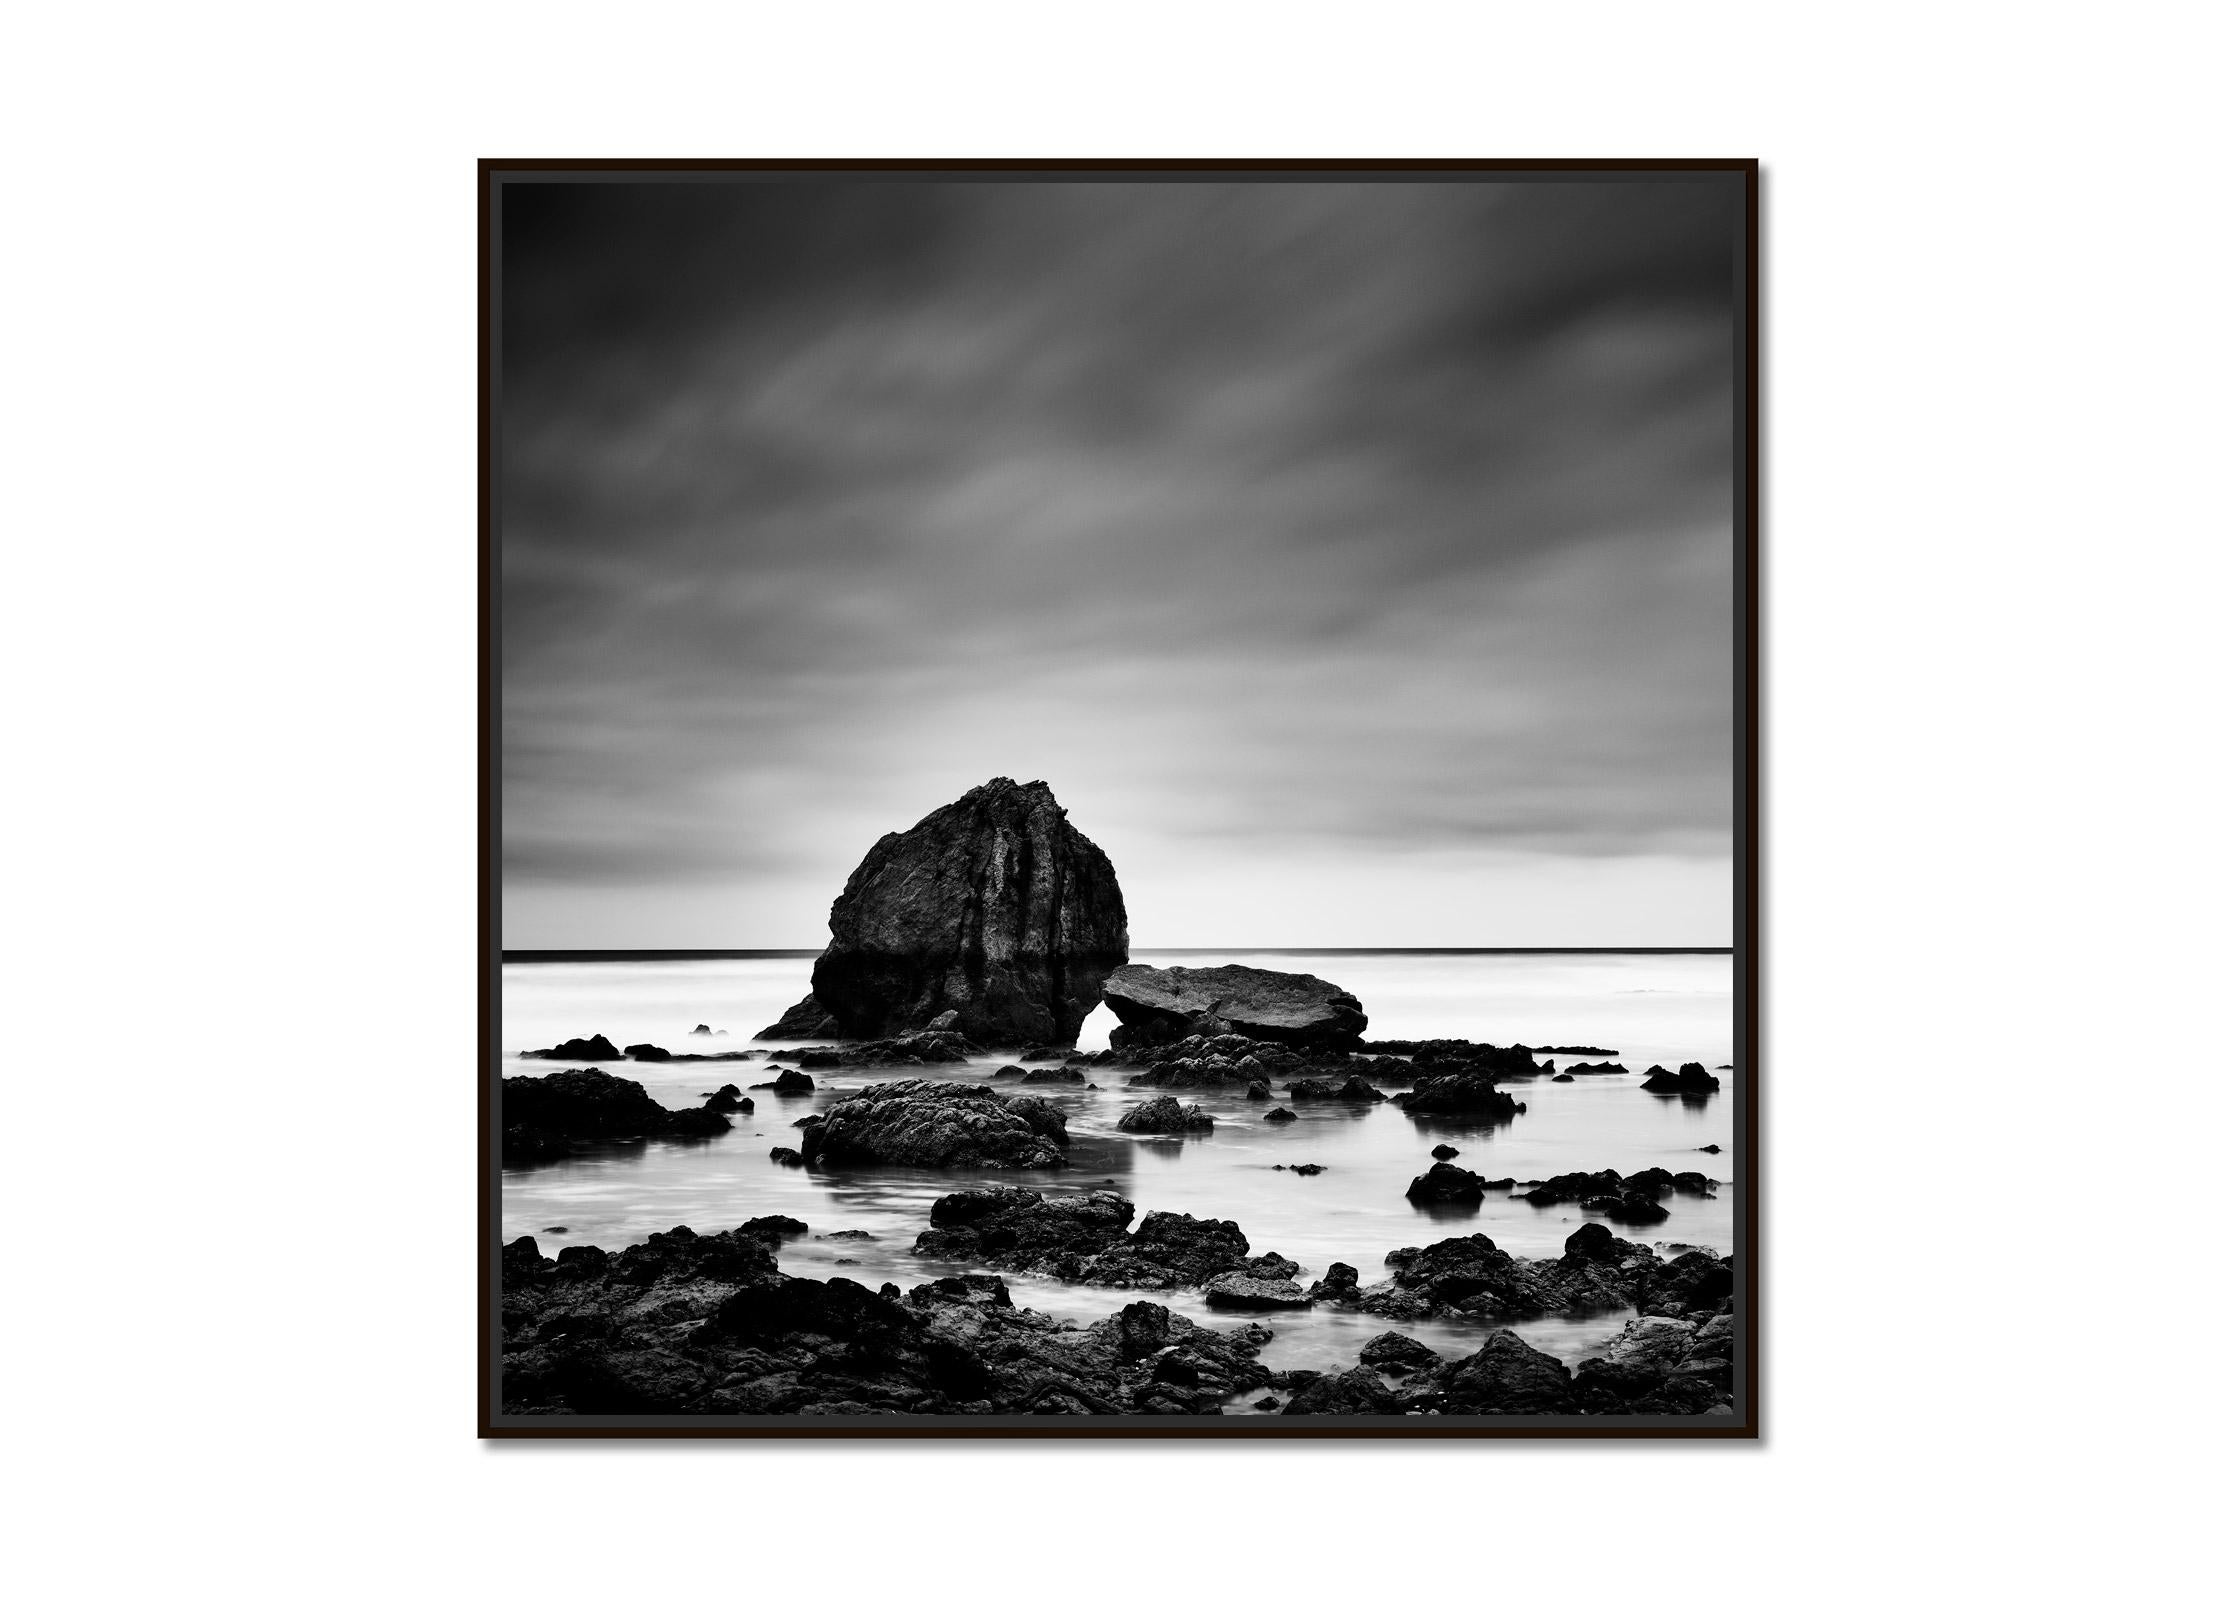 Beach Rock, giant stones, shoreline, France, black and white, landscape, photo - Photograph by Gerald Berghammer